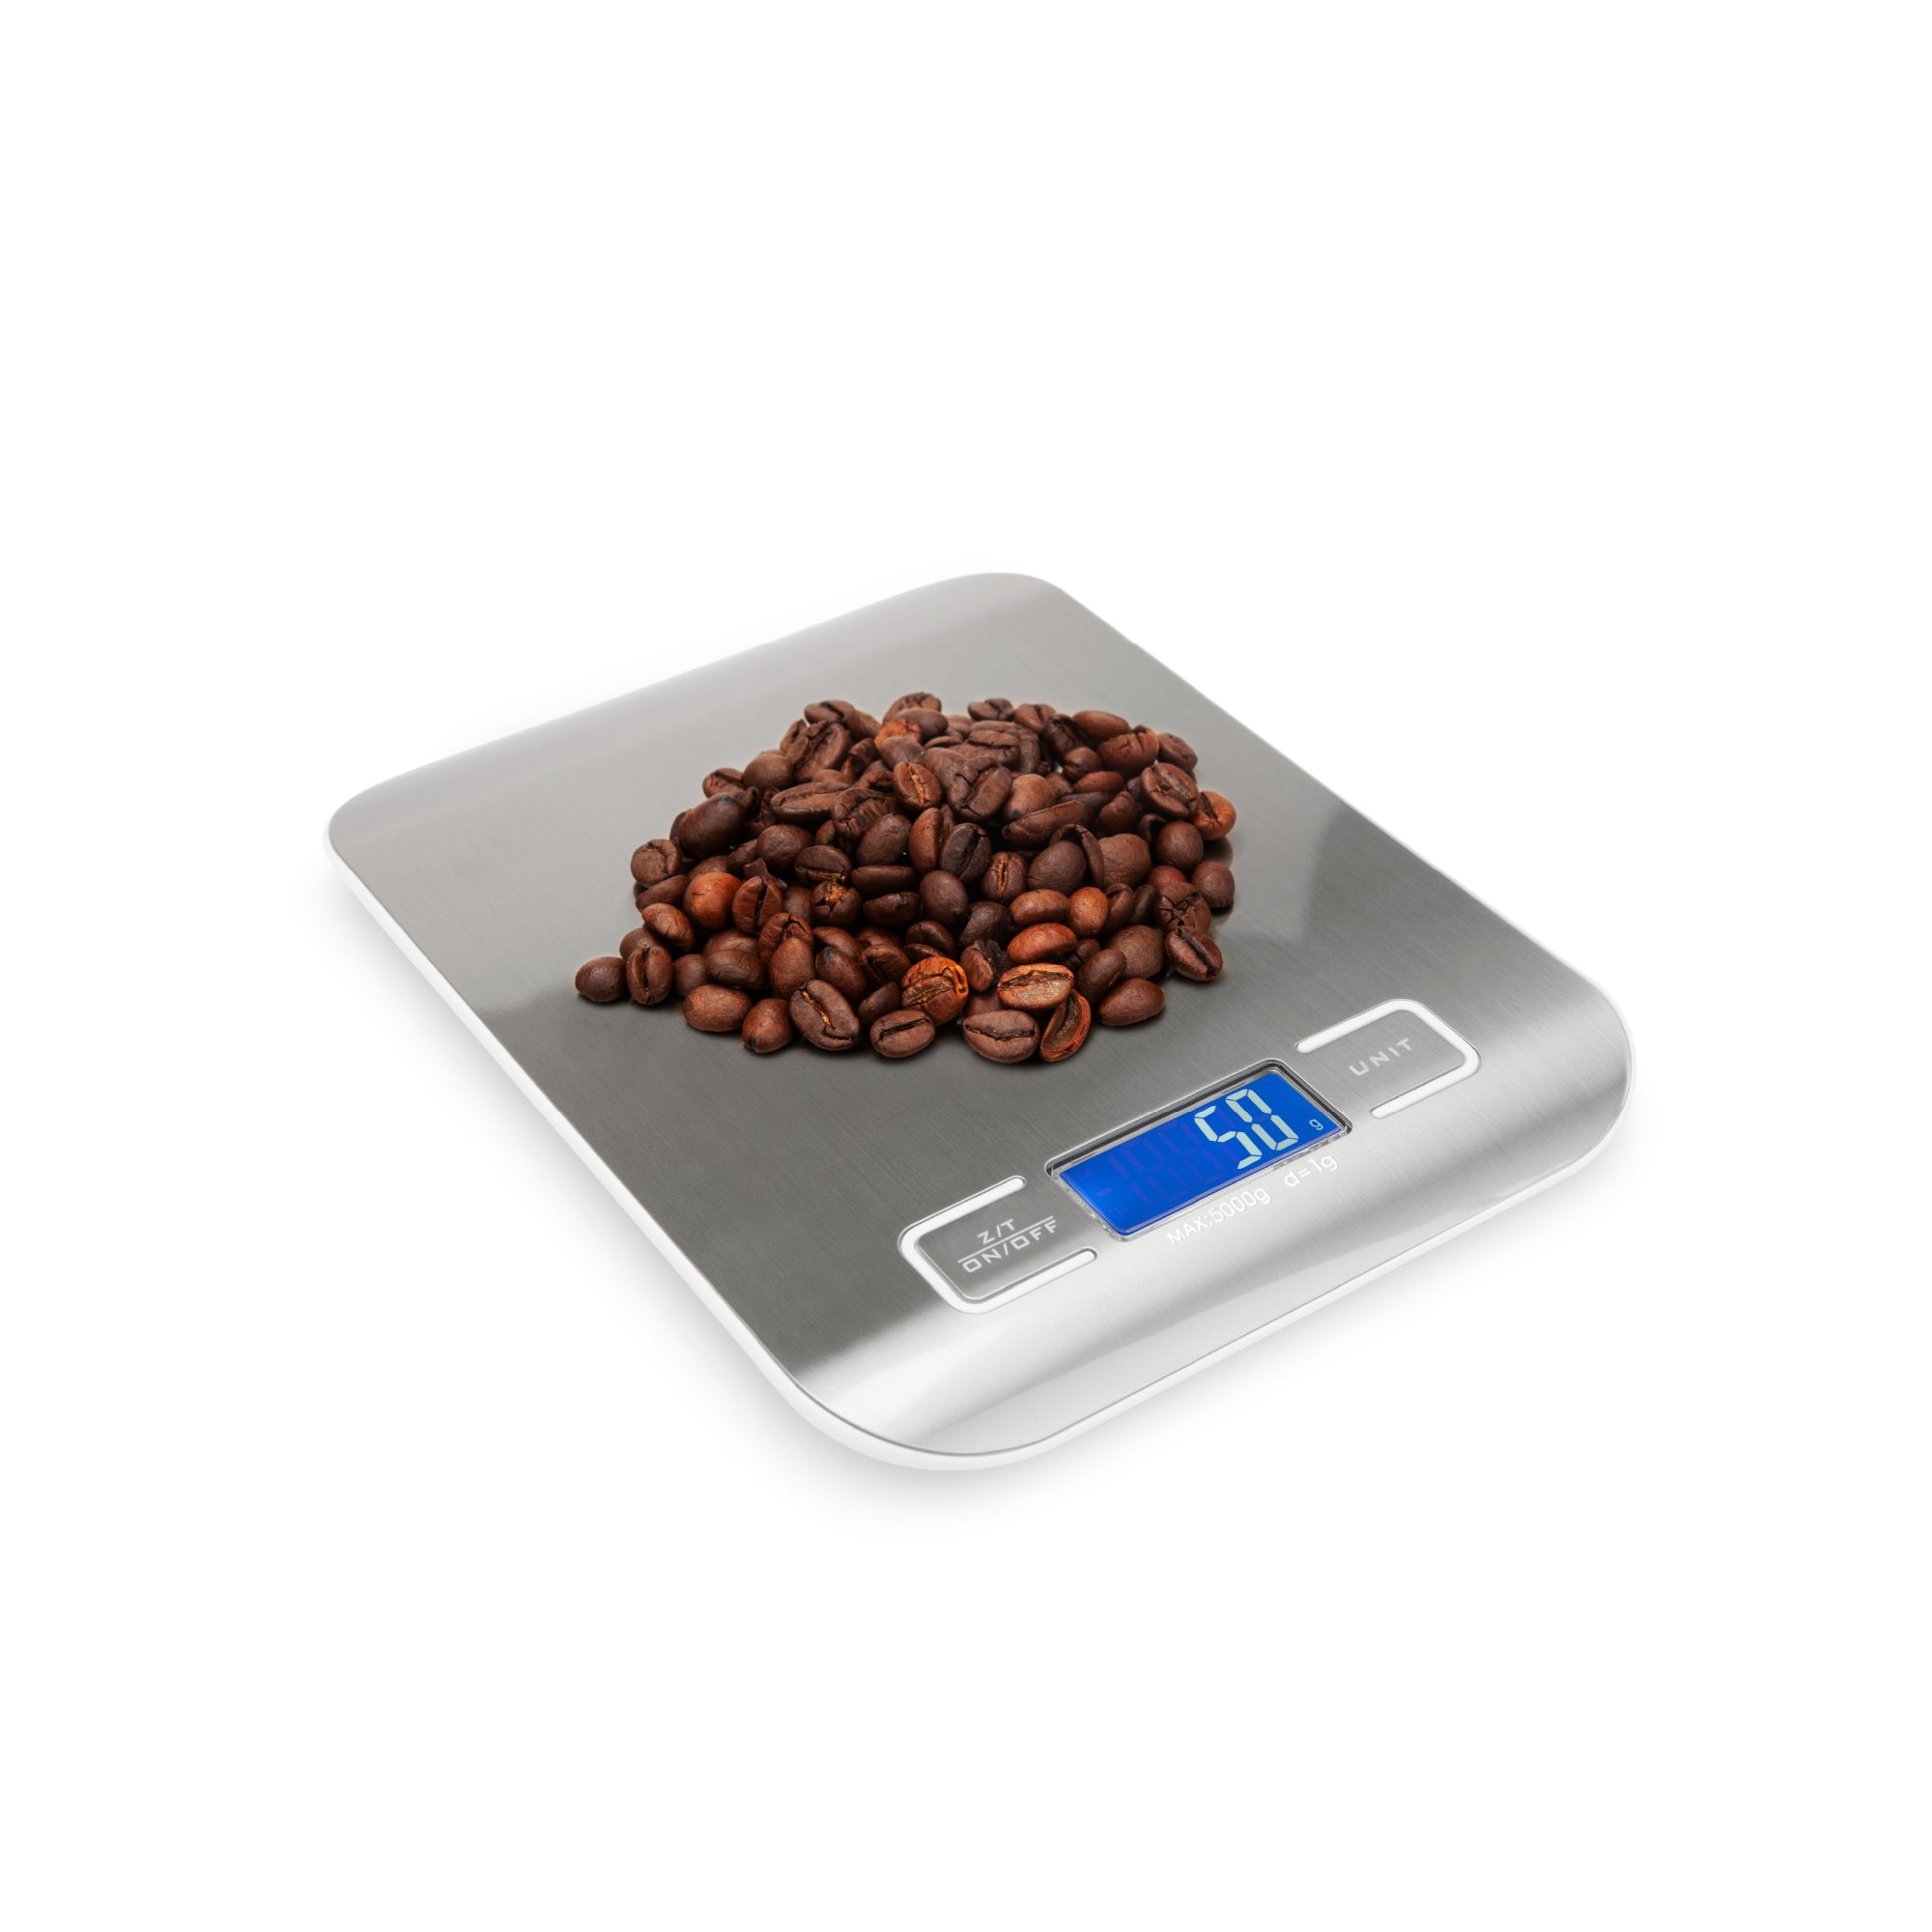 Kitchen Scale, Kitchen Digital Scale, Baking Food Scale, Coffee